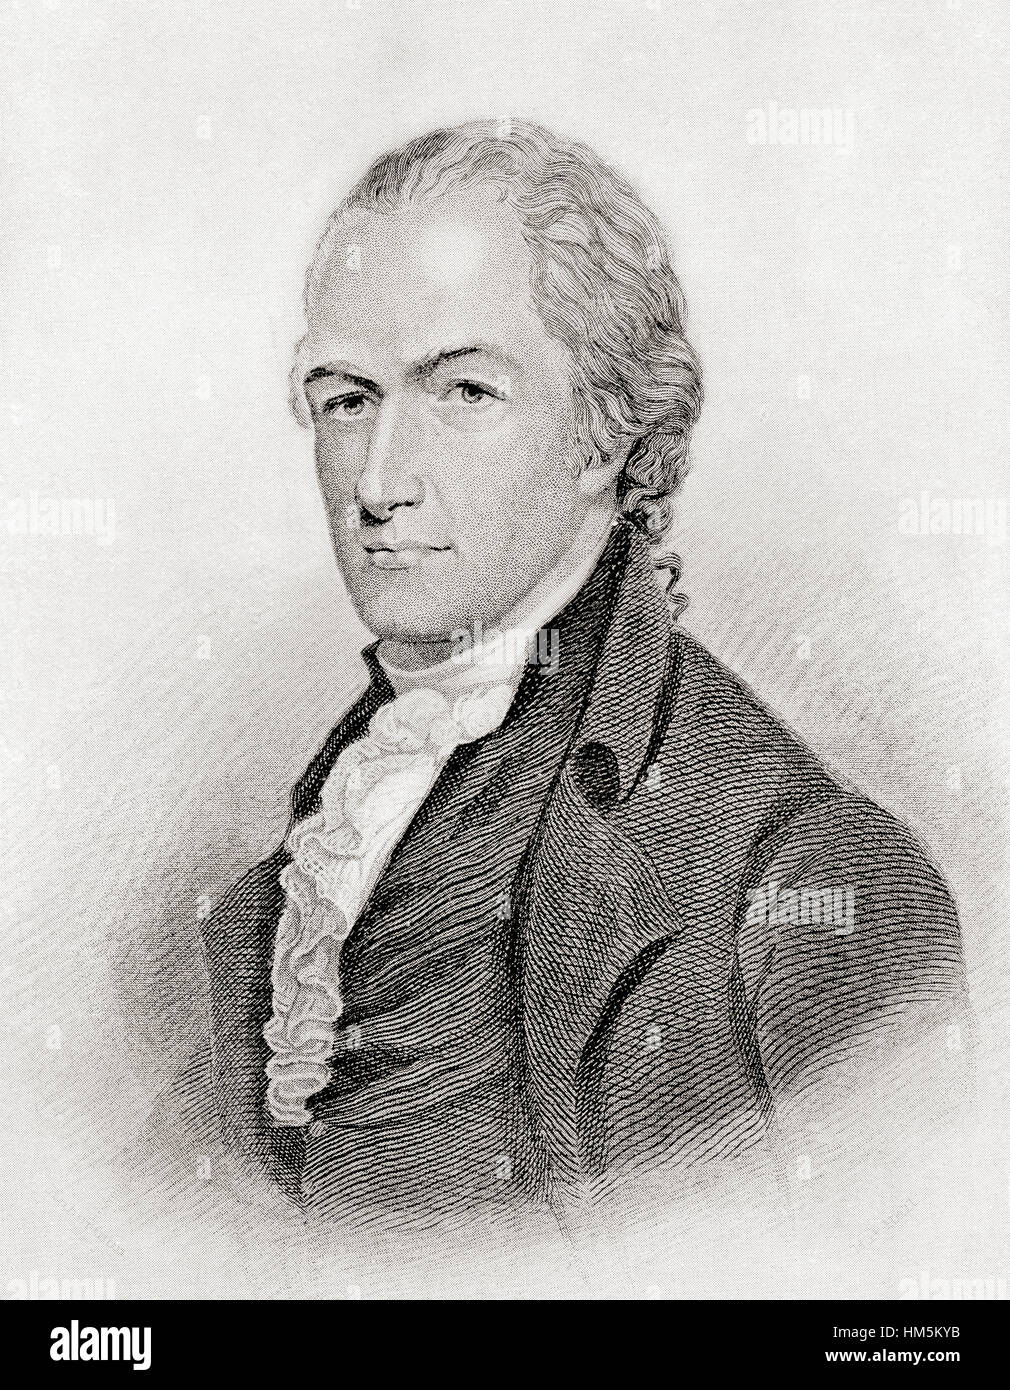 Alexander Hamilton, c.1755/ 1757 – 1804.  American statesman and one of the Founding Fathers of the United States. Stock Photo